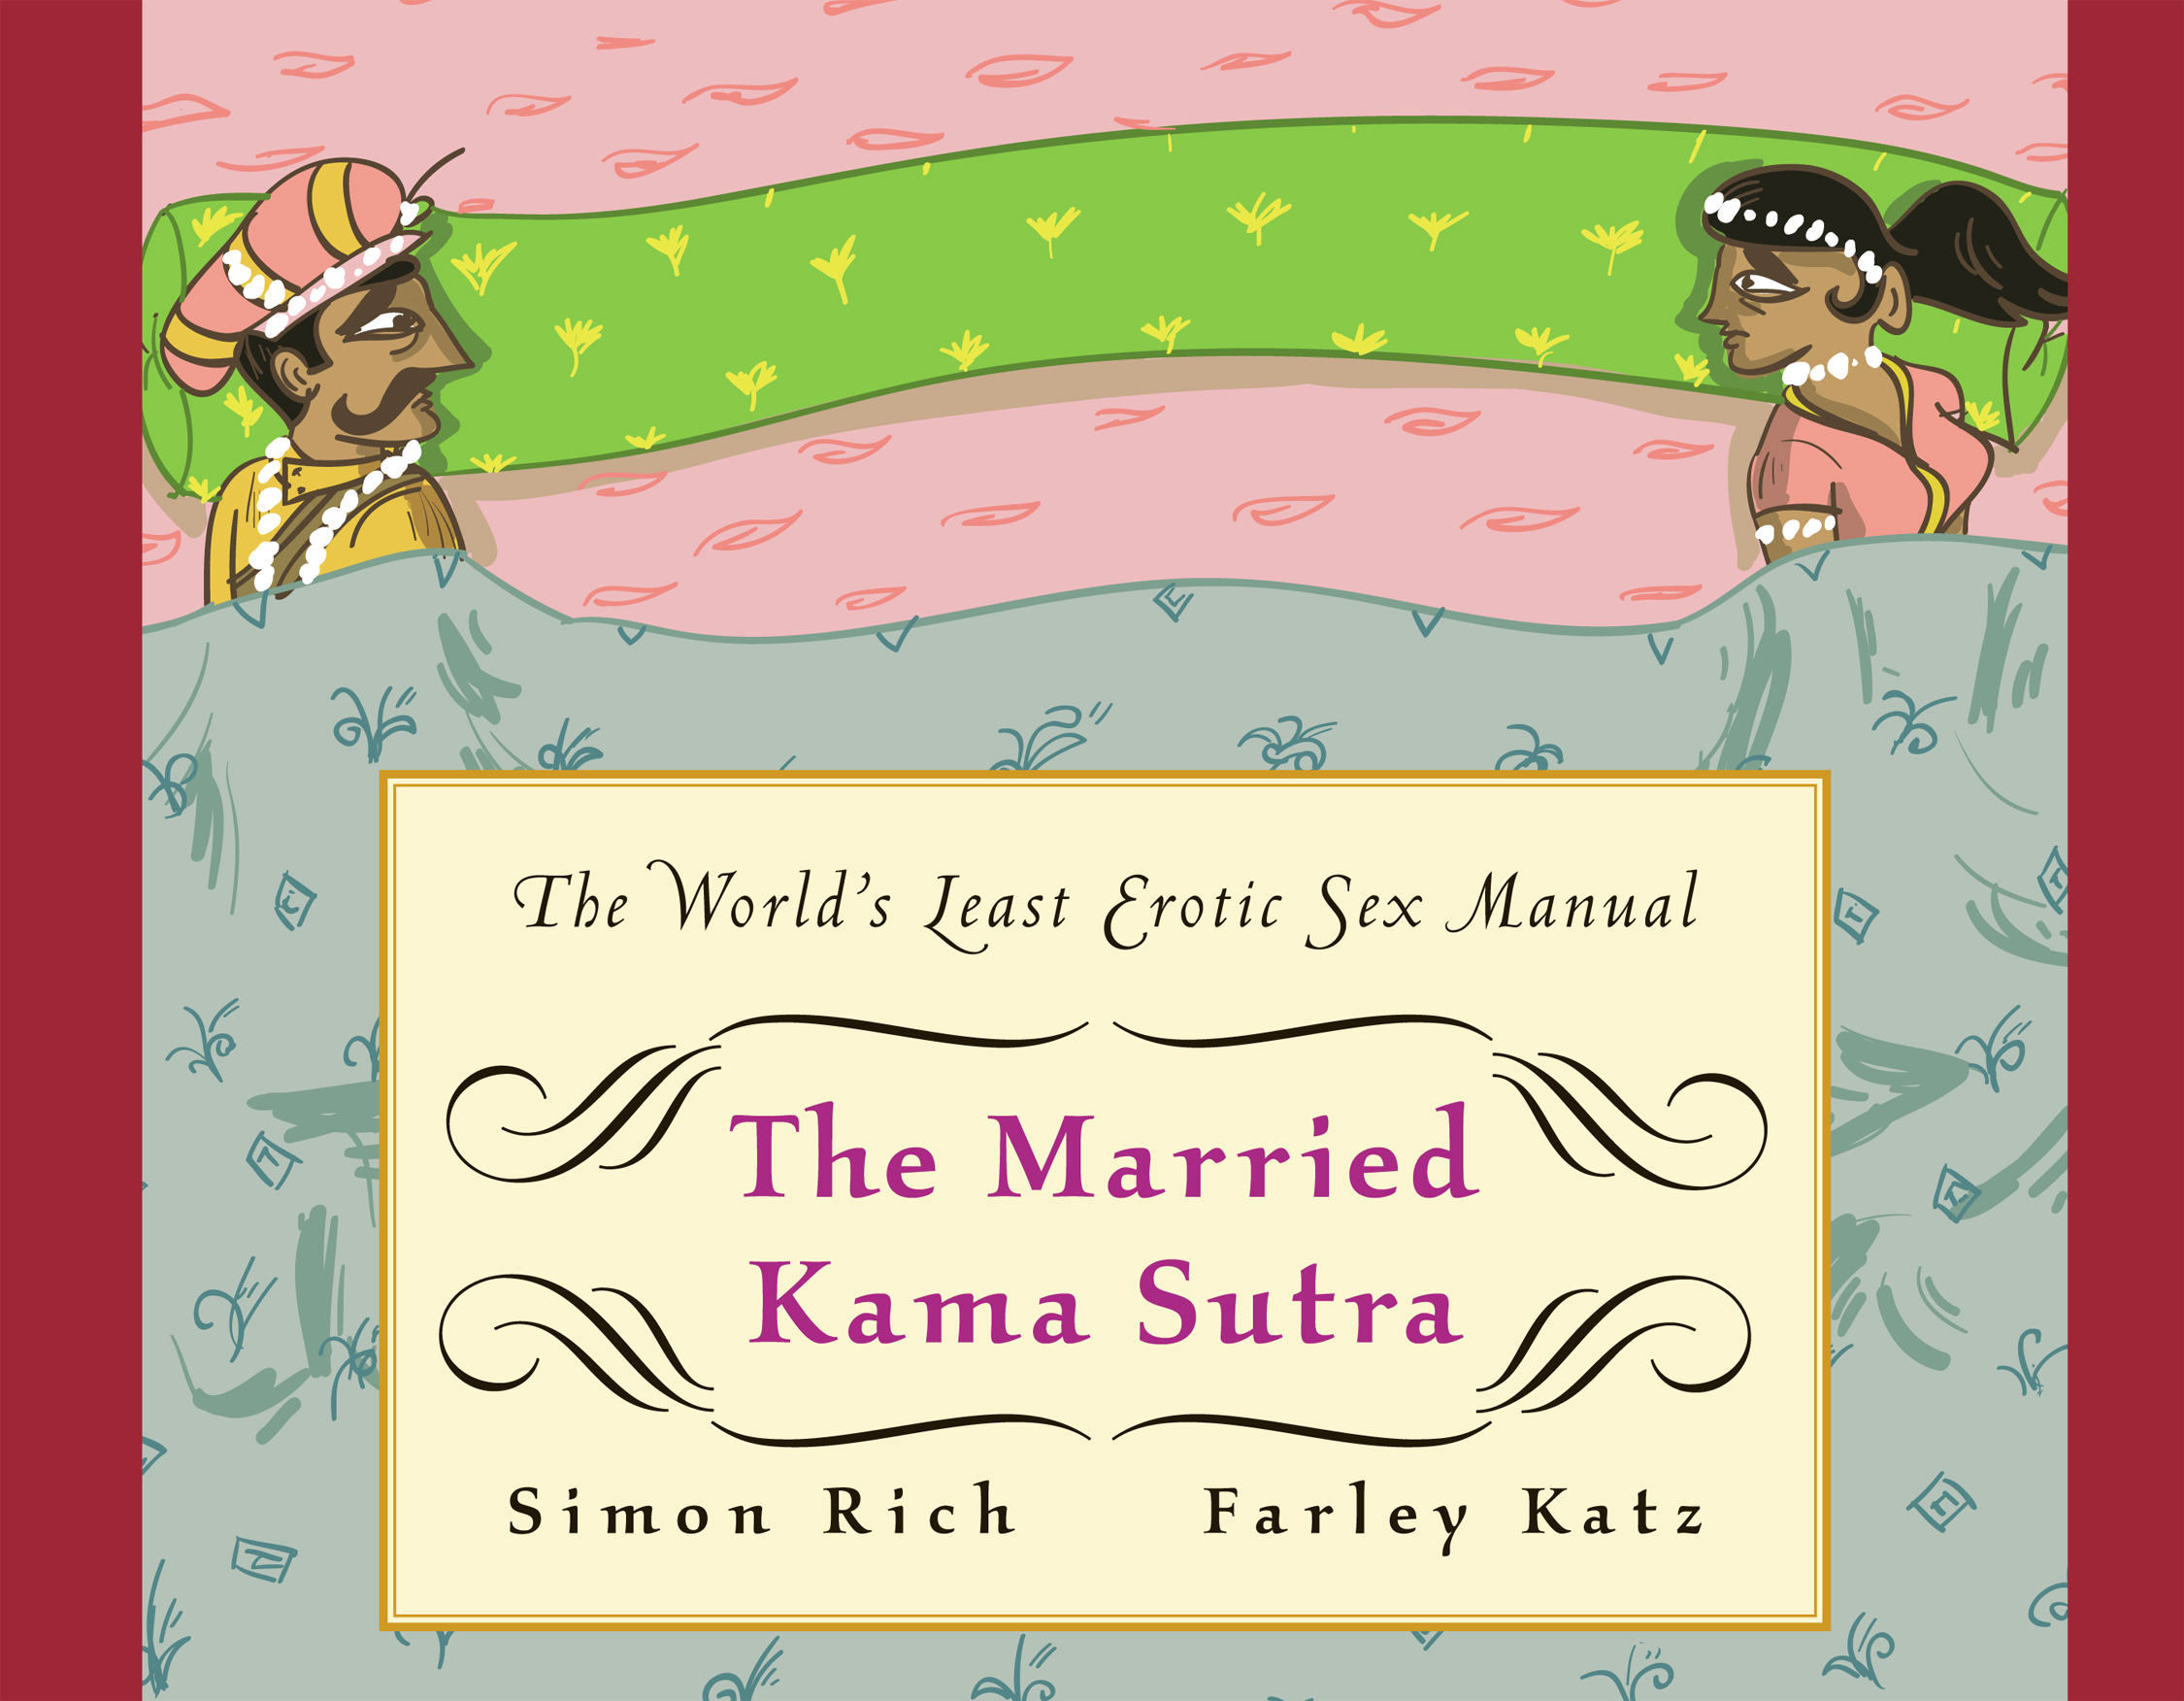 The Married Kama Sutra by Simon Rich